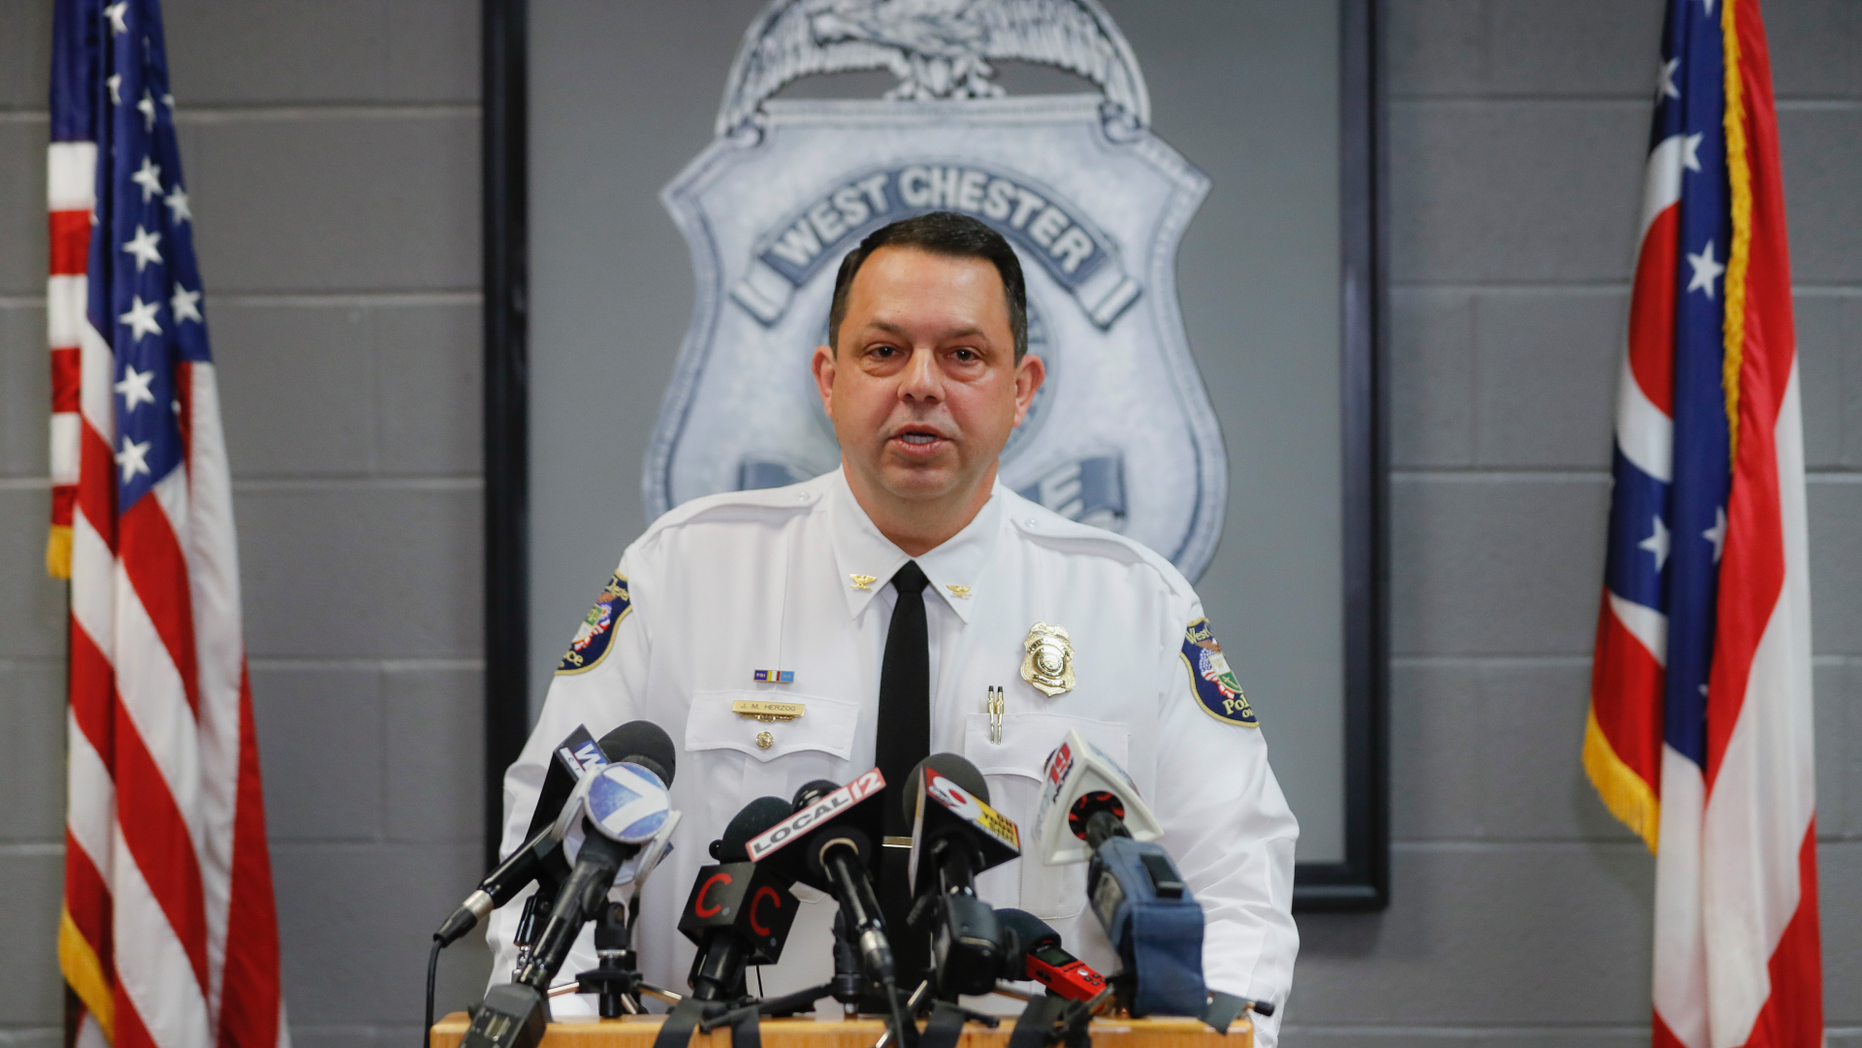 West Chester Police Chief Joel Herzog speaks to reporters at a press conference on Monday, April 29, 2019 in West Chester, Ohio. Several people were found dead in an apartment complex in Ohio after a man called 911 said that he had gone home to find his wife and family members on the floor. and who were bleeding. Herzog said the police were looking for a suspect in the area and that there was no immediate threat to the community. (AP Photo / John Minchillo)